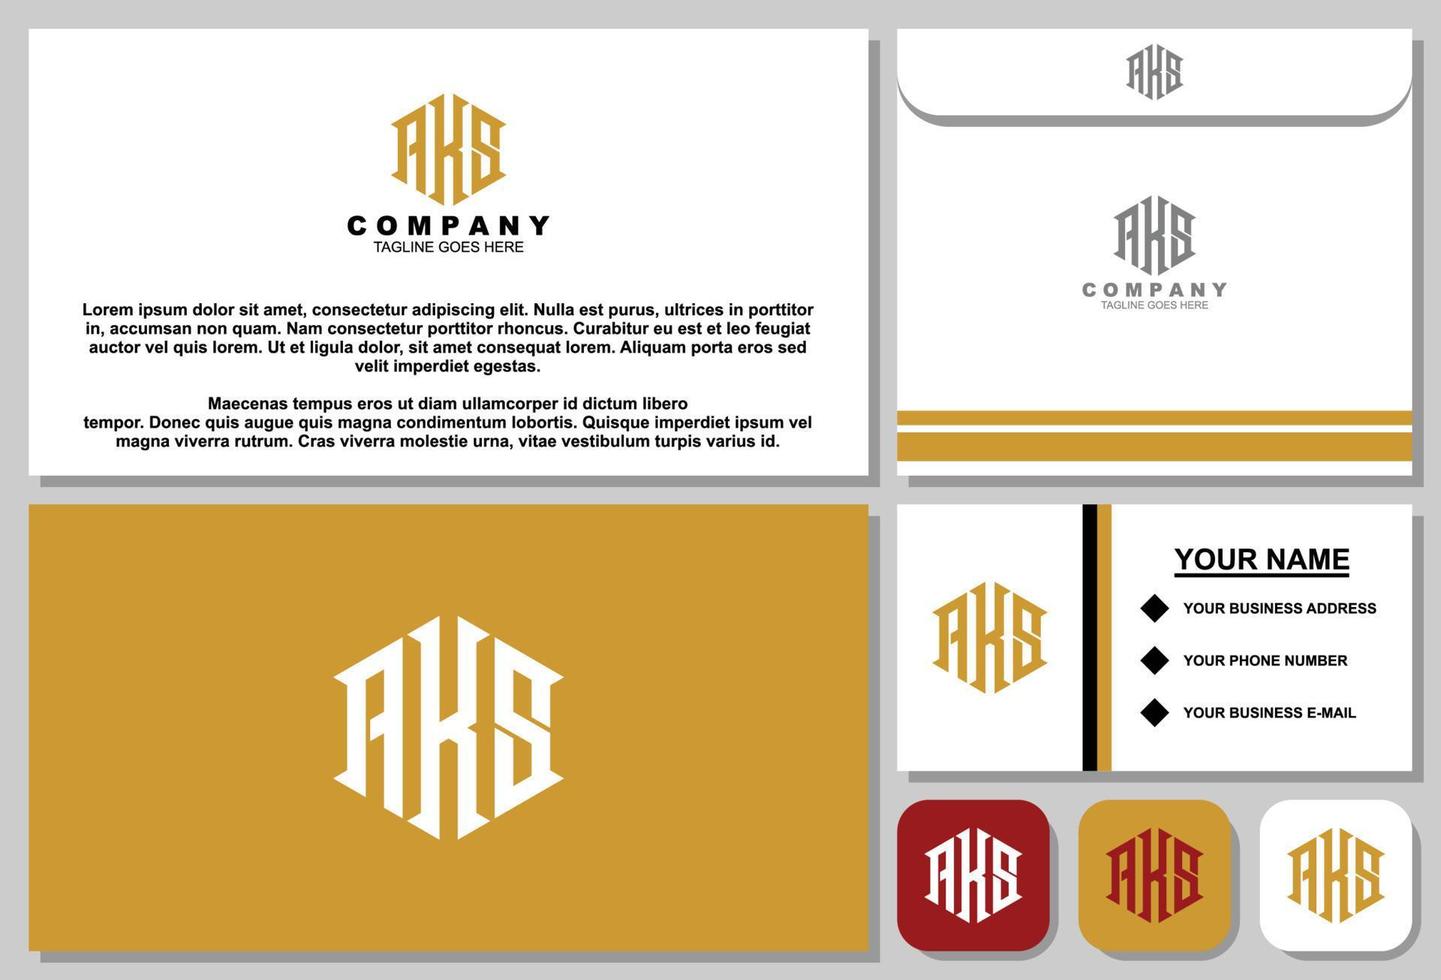 Letter A K S monogram logo design with business card template vector